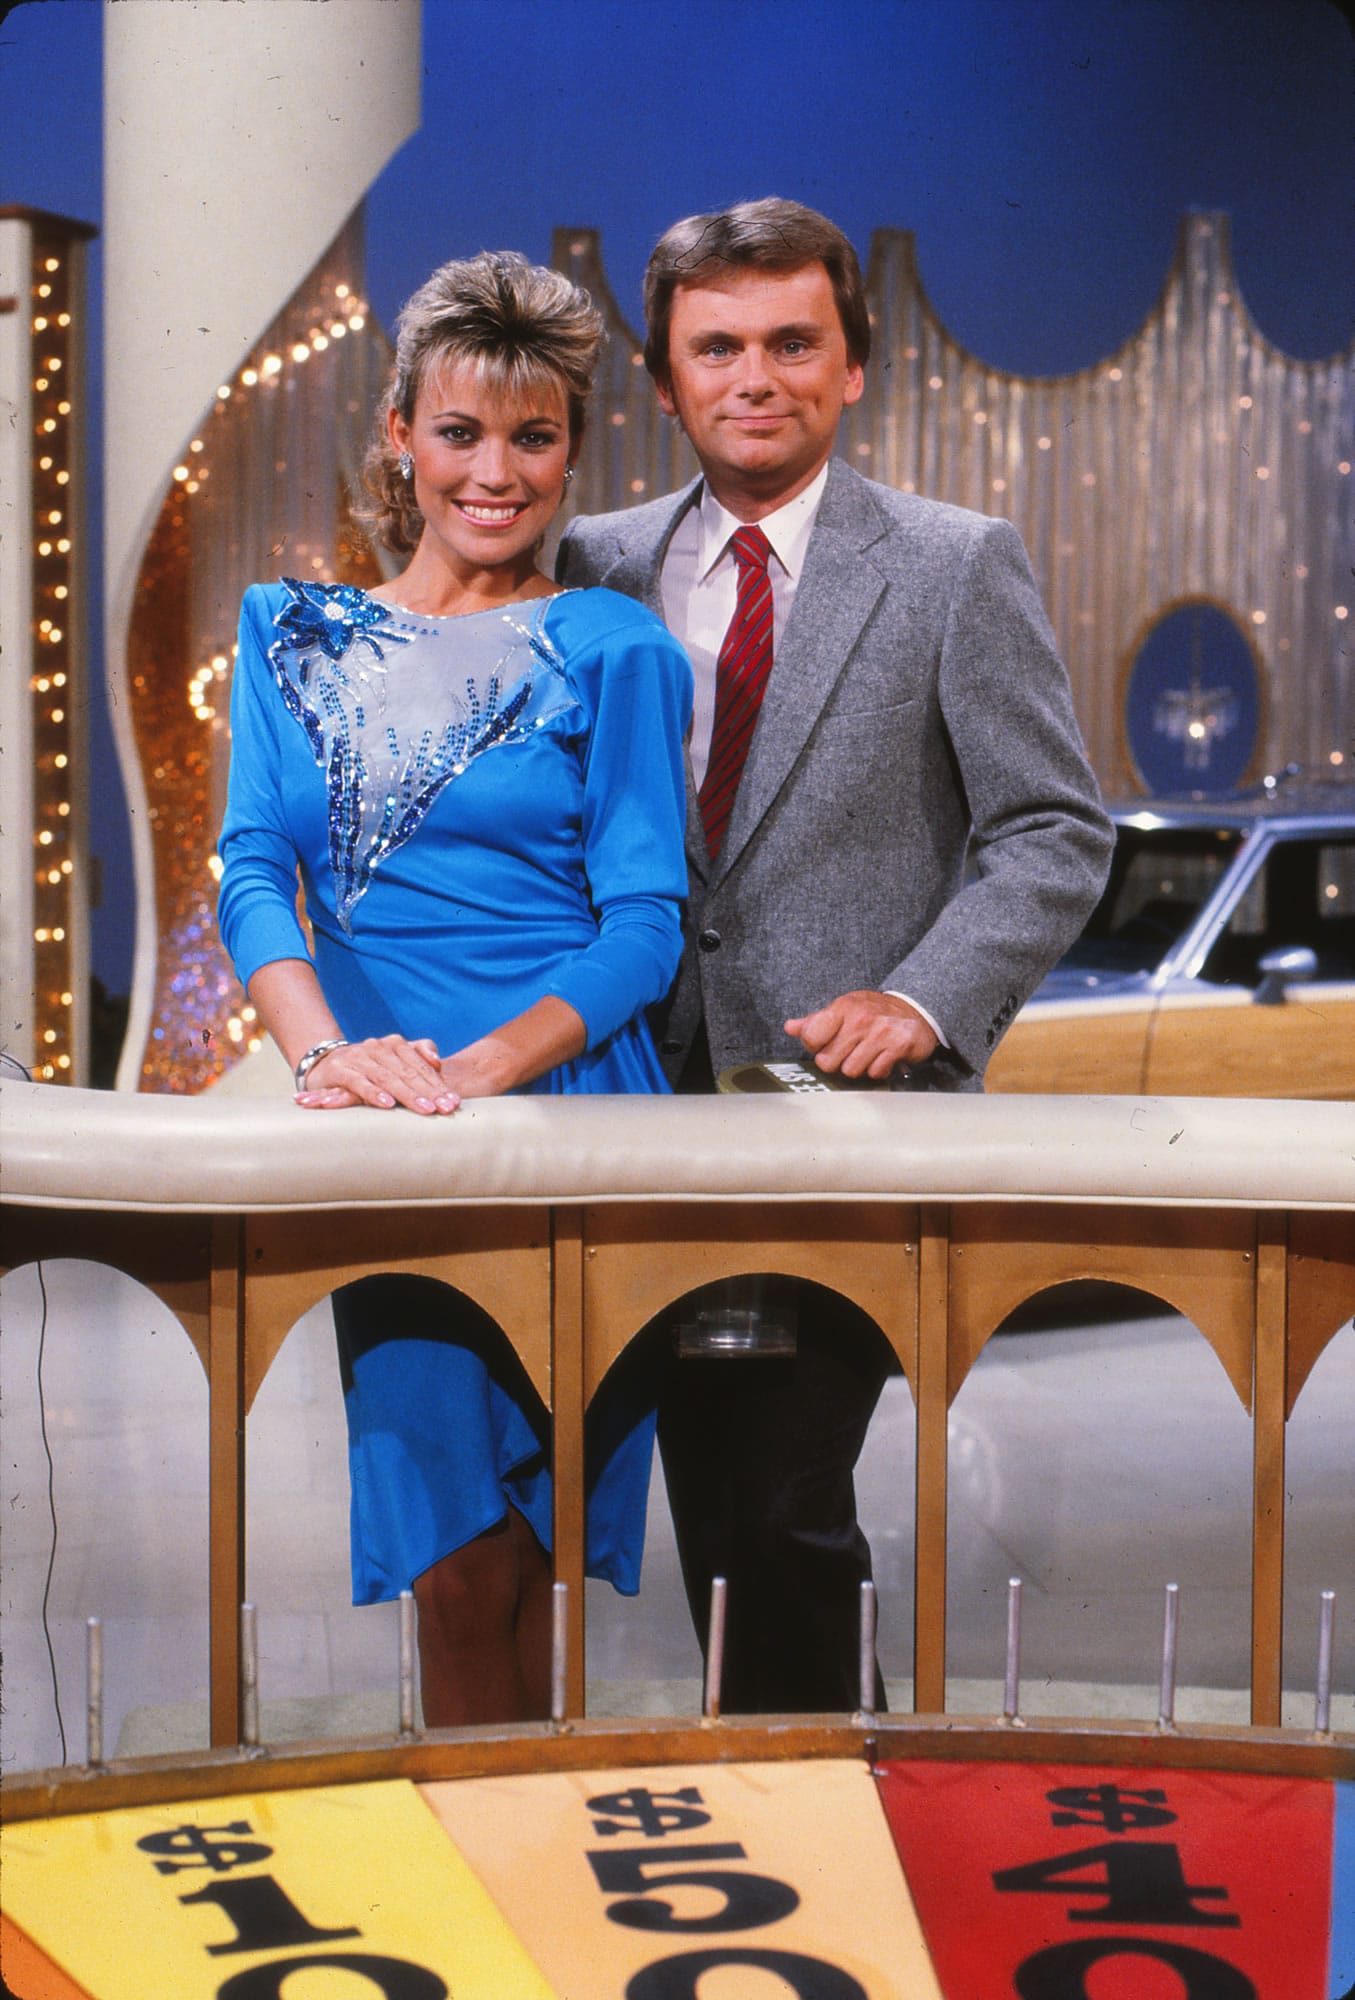 Vanna White, seen with &quot;Wheel of Fortune&quot; host Pat Sajaki in 1986. White has been with the game show for 30 years. Illustrates VANNA (category e), by Katherine Boyle (c) 2013, The Washington Post. Moved Wednesday, Sept. 11, 2013.